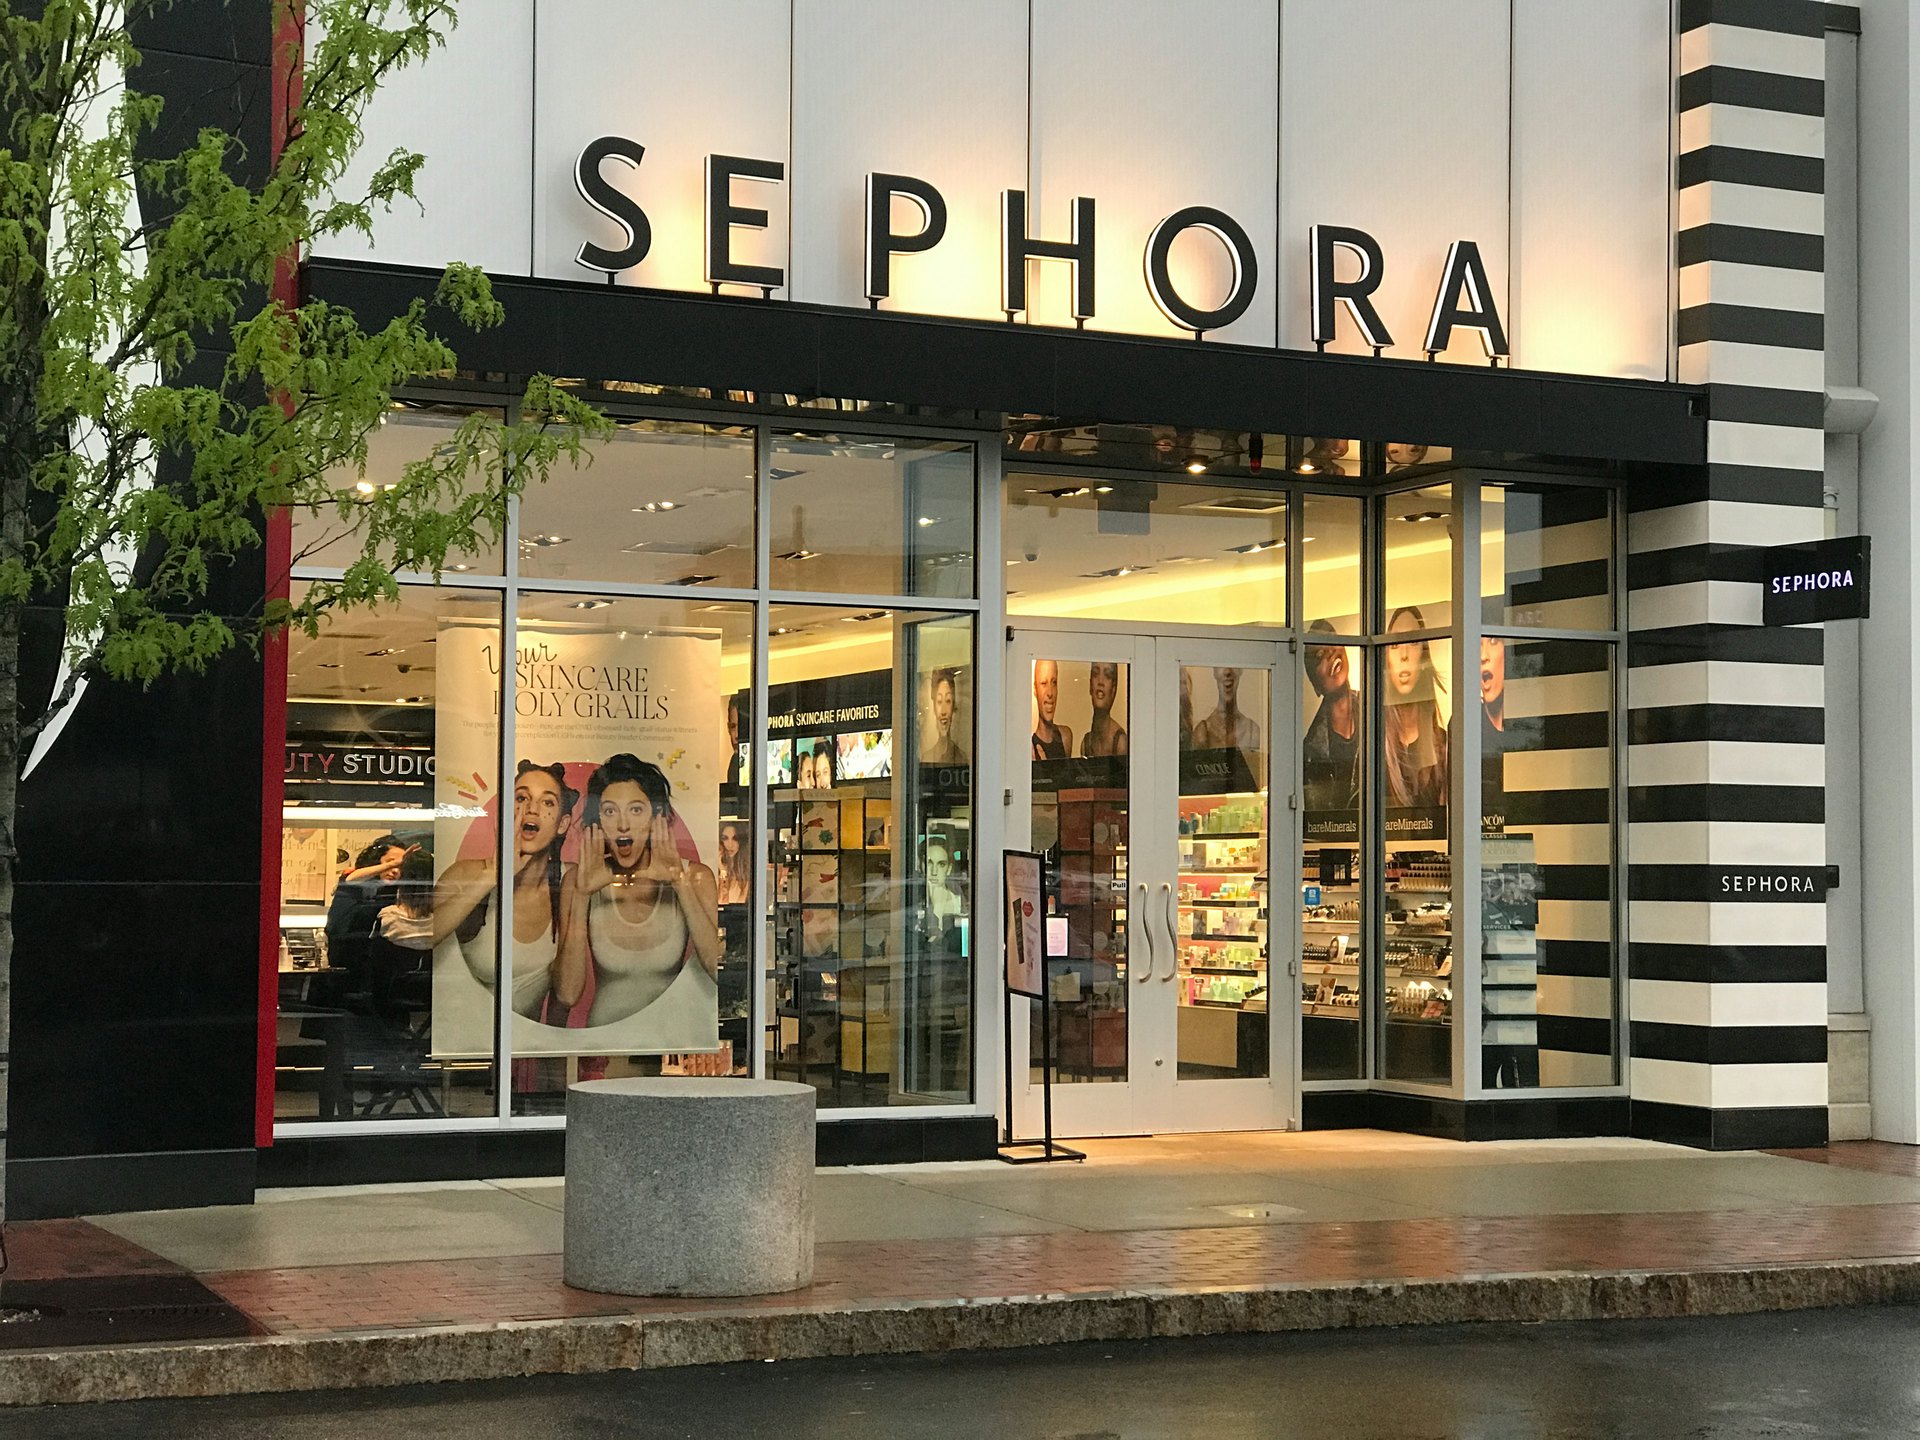 Sephora x Cha Ling Highlight Retailer's Embrace of Chinese Brands